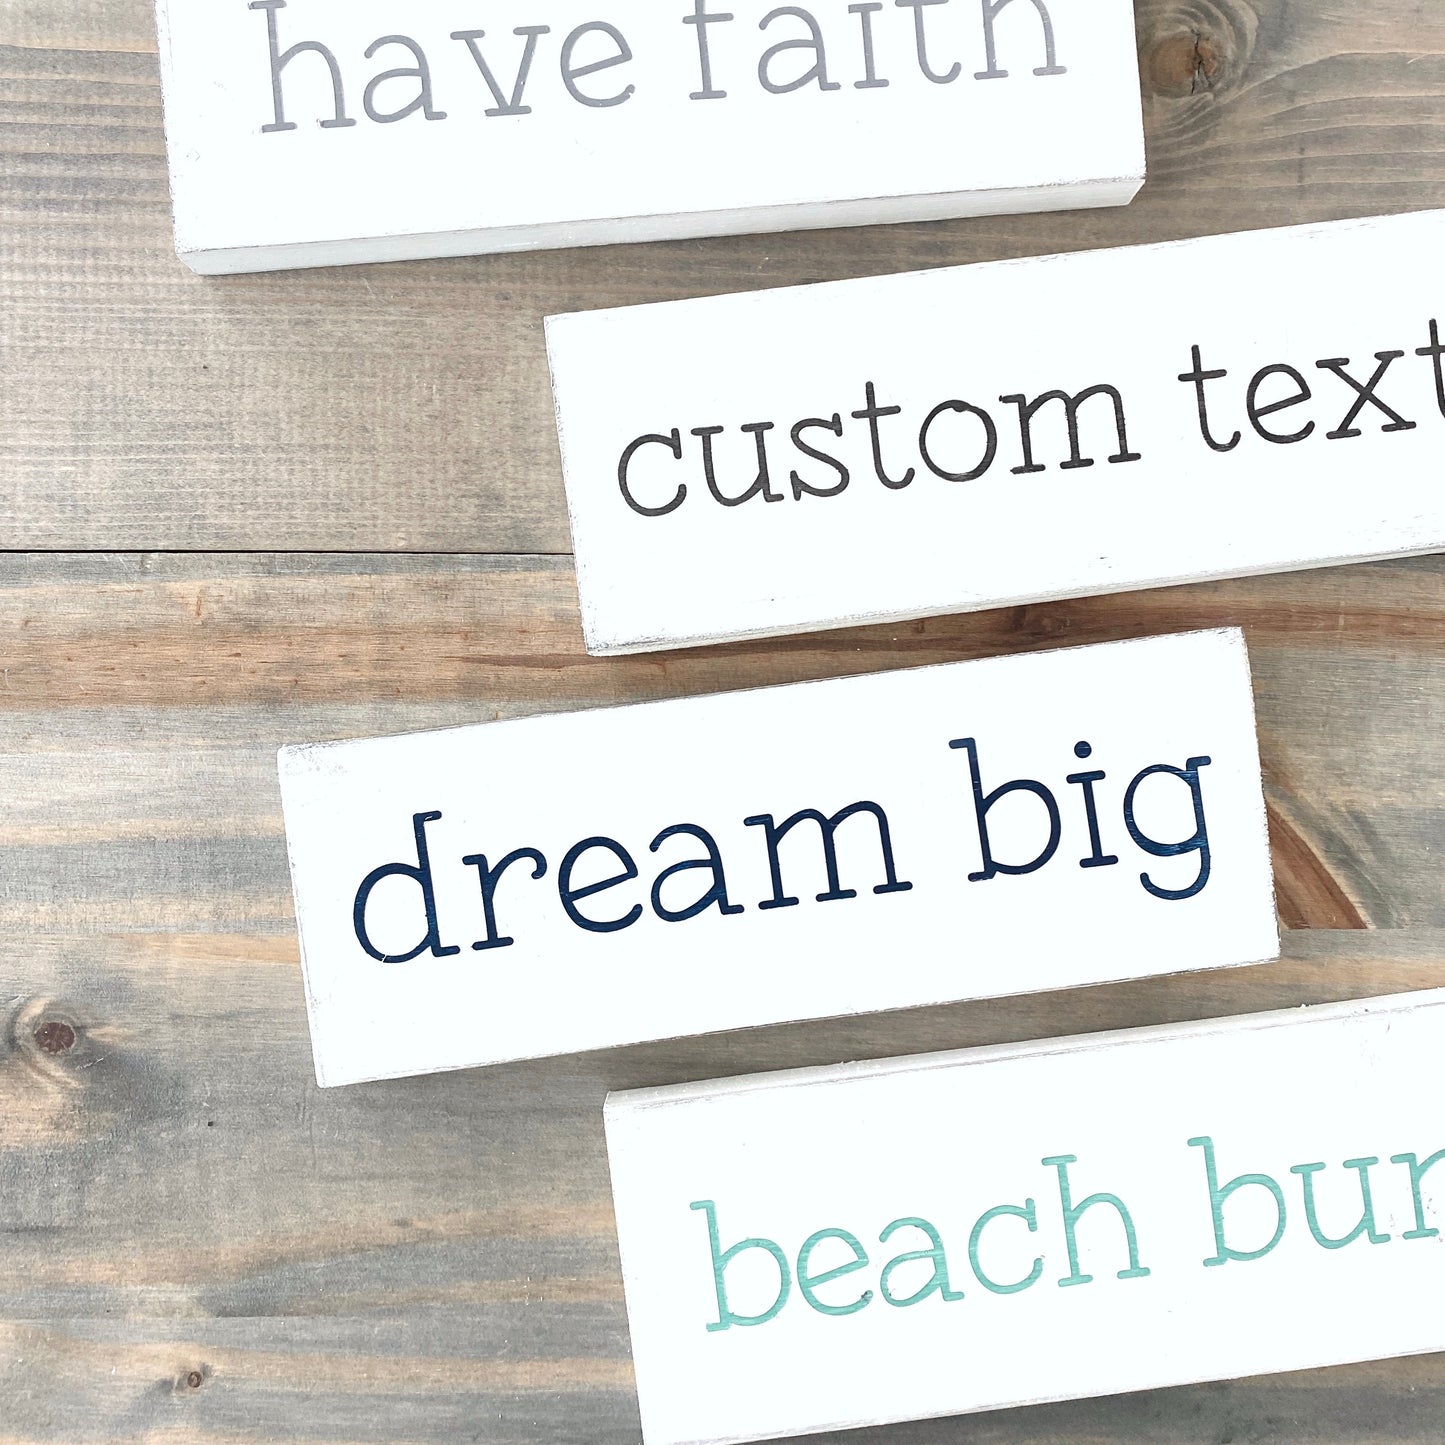 CUSTOM- Small Phrase or Word Sign 10 x 3